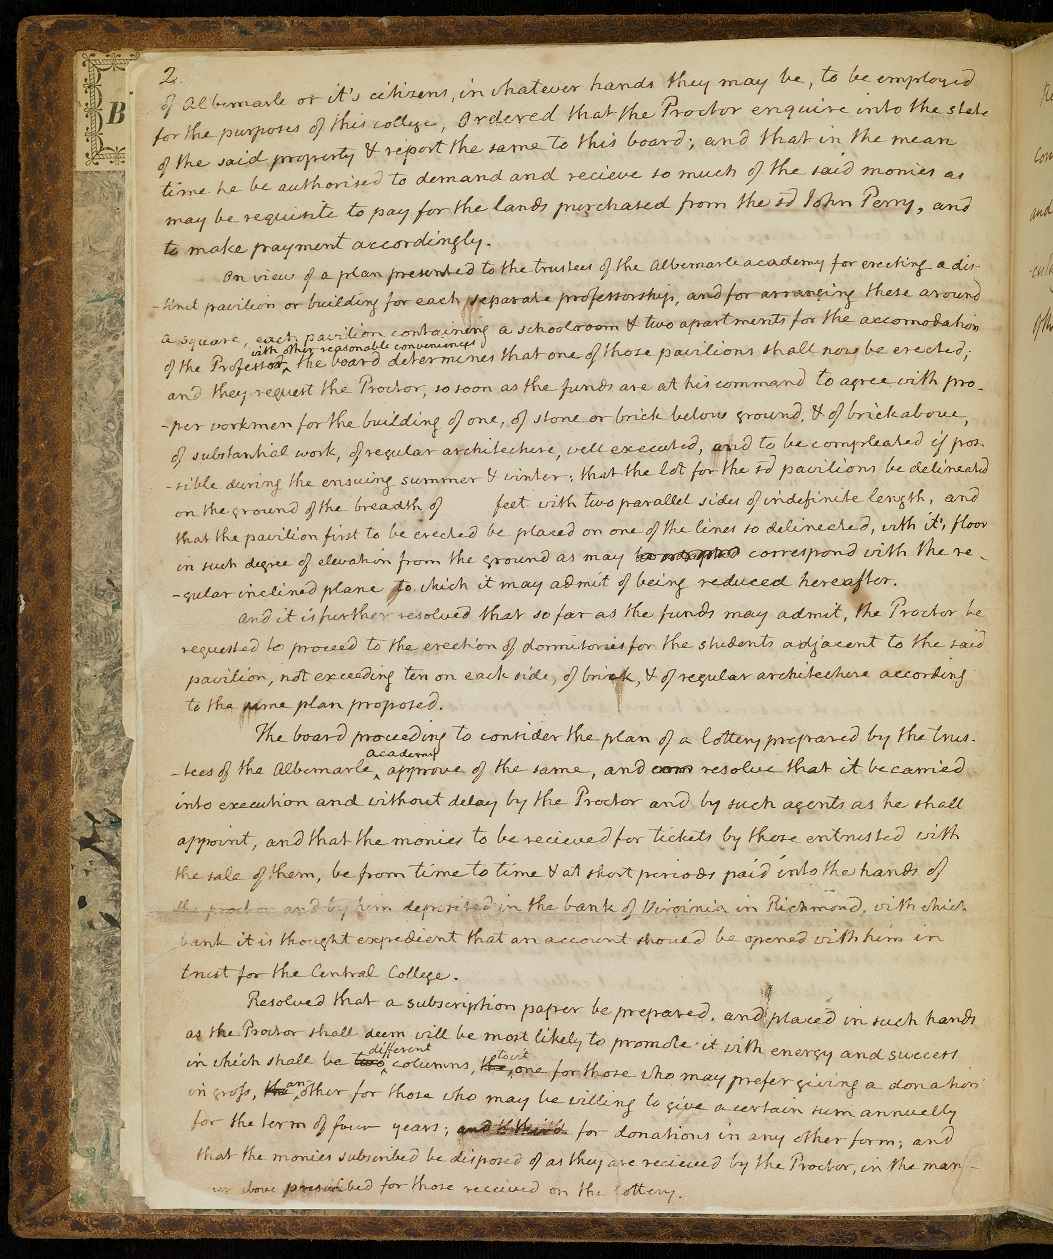 Page two of the Minute Book of the Board of Visitors, written in Thomas Jefferson's hand, 1819.